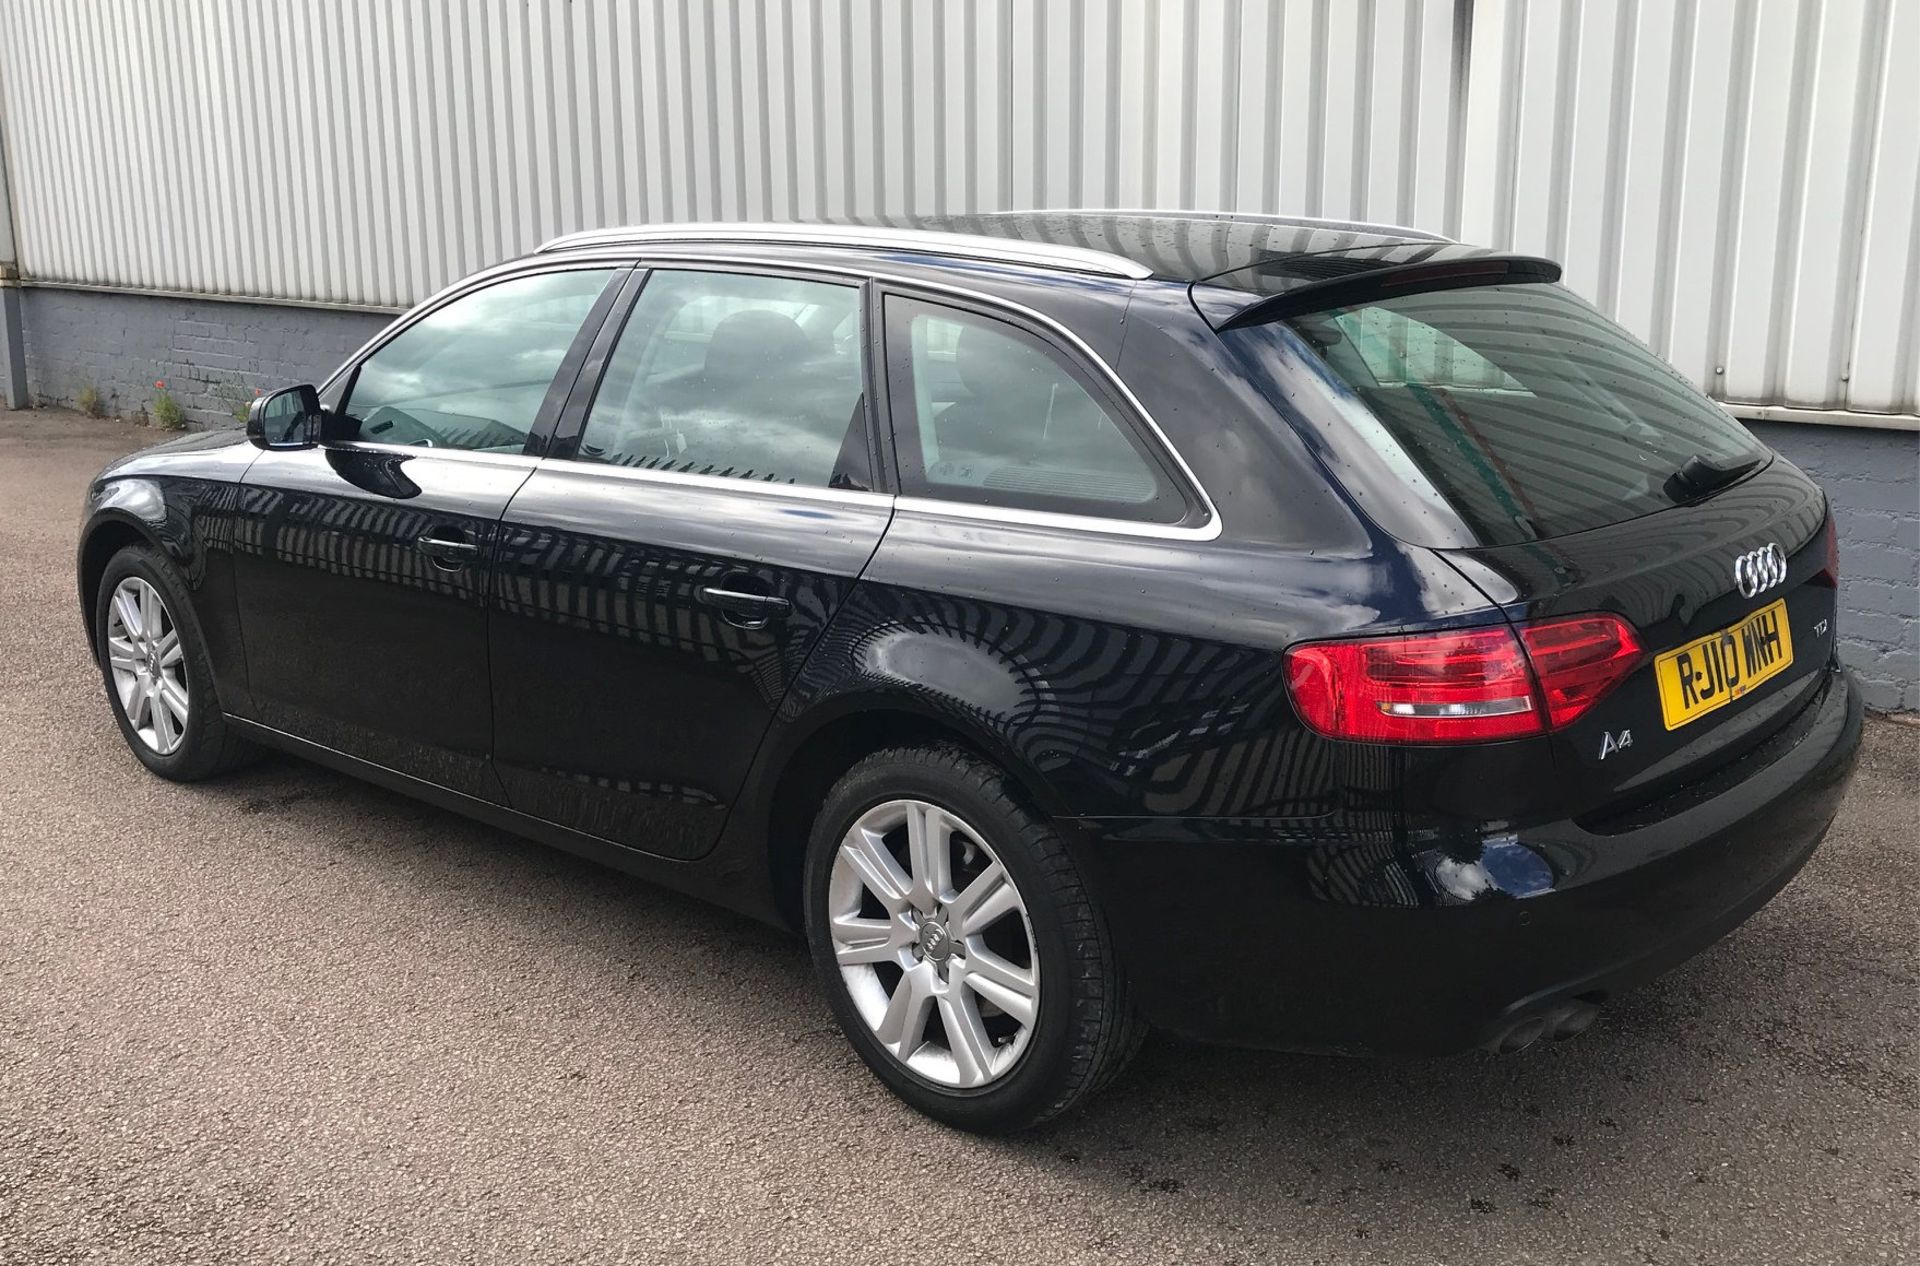 2010 Audi A4 2.0 Tdi Se Avant 5 Door Estate - CL505 - NO VAT ON THE HAMMER - Location: Corby, Northa - Image 3 of 18